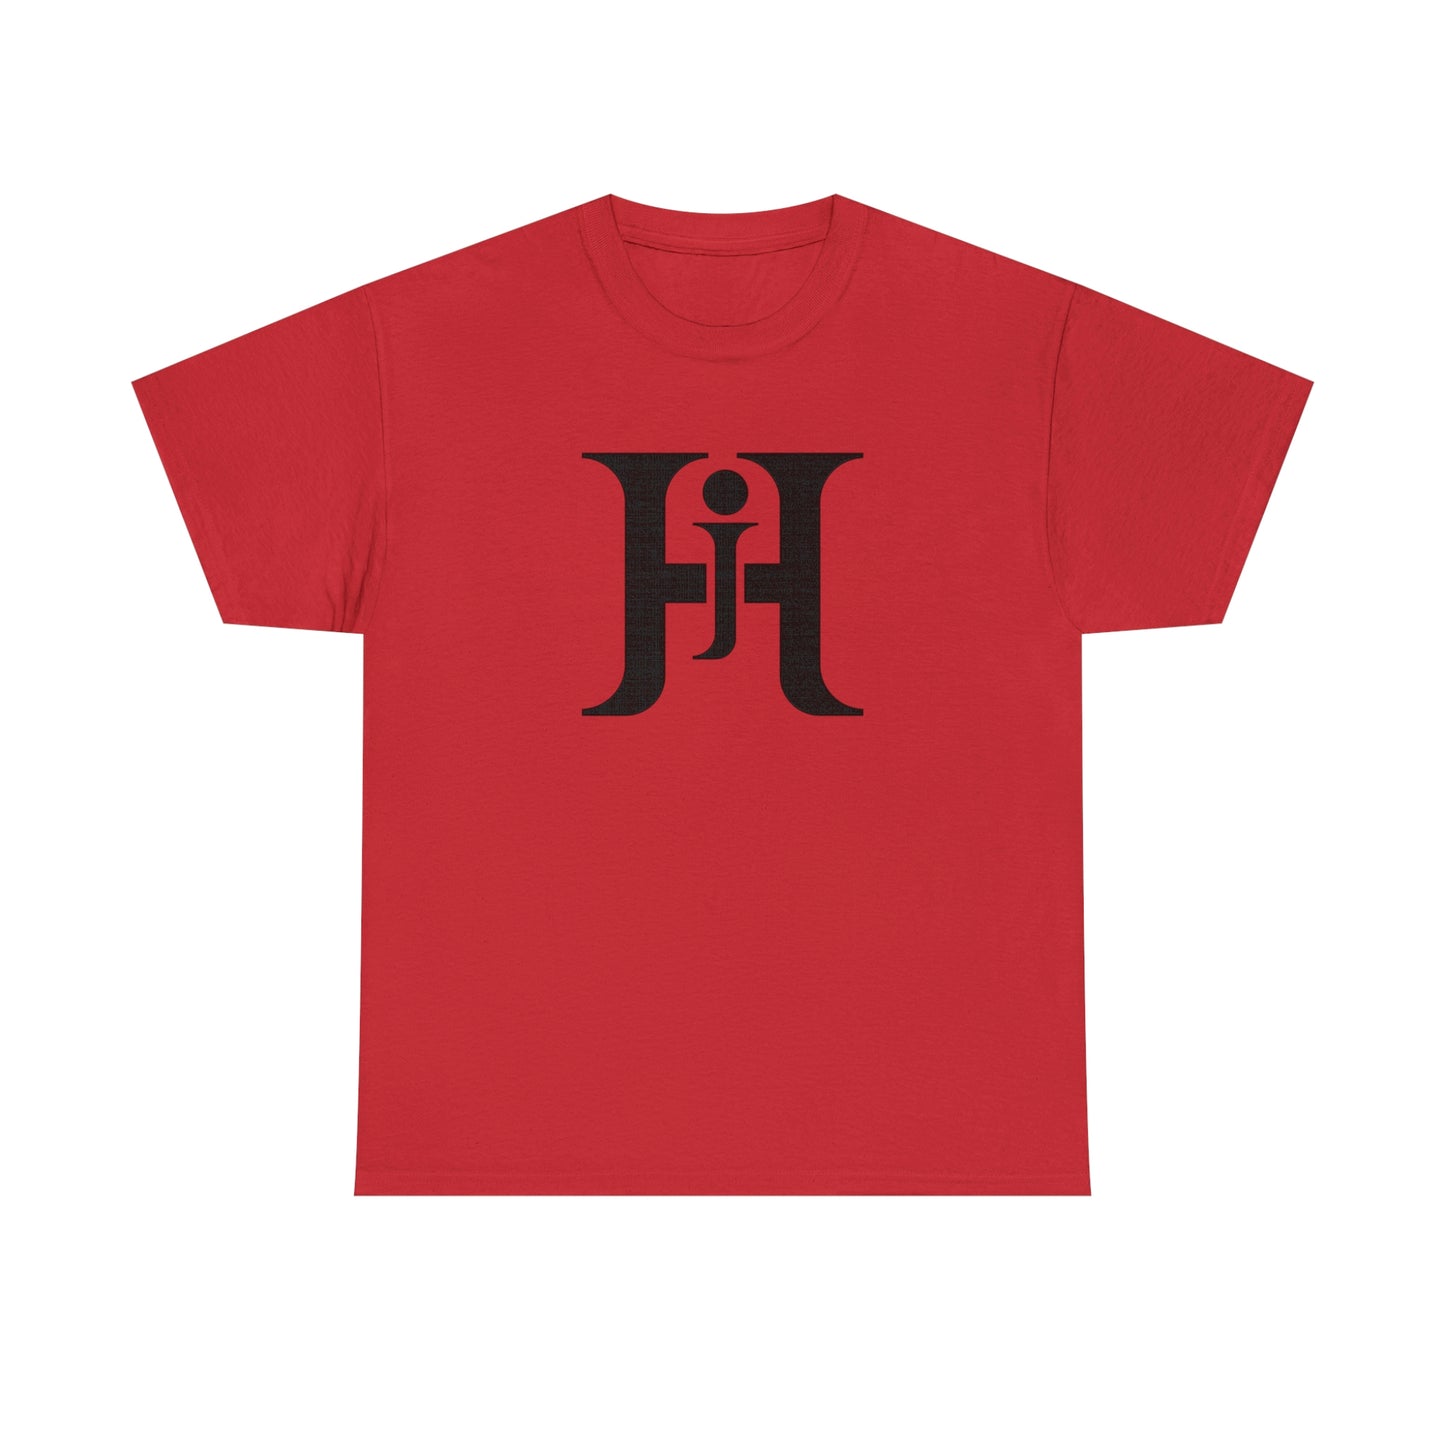 James Hines IV "JH" Double Sided Tee